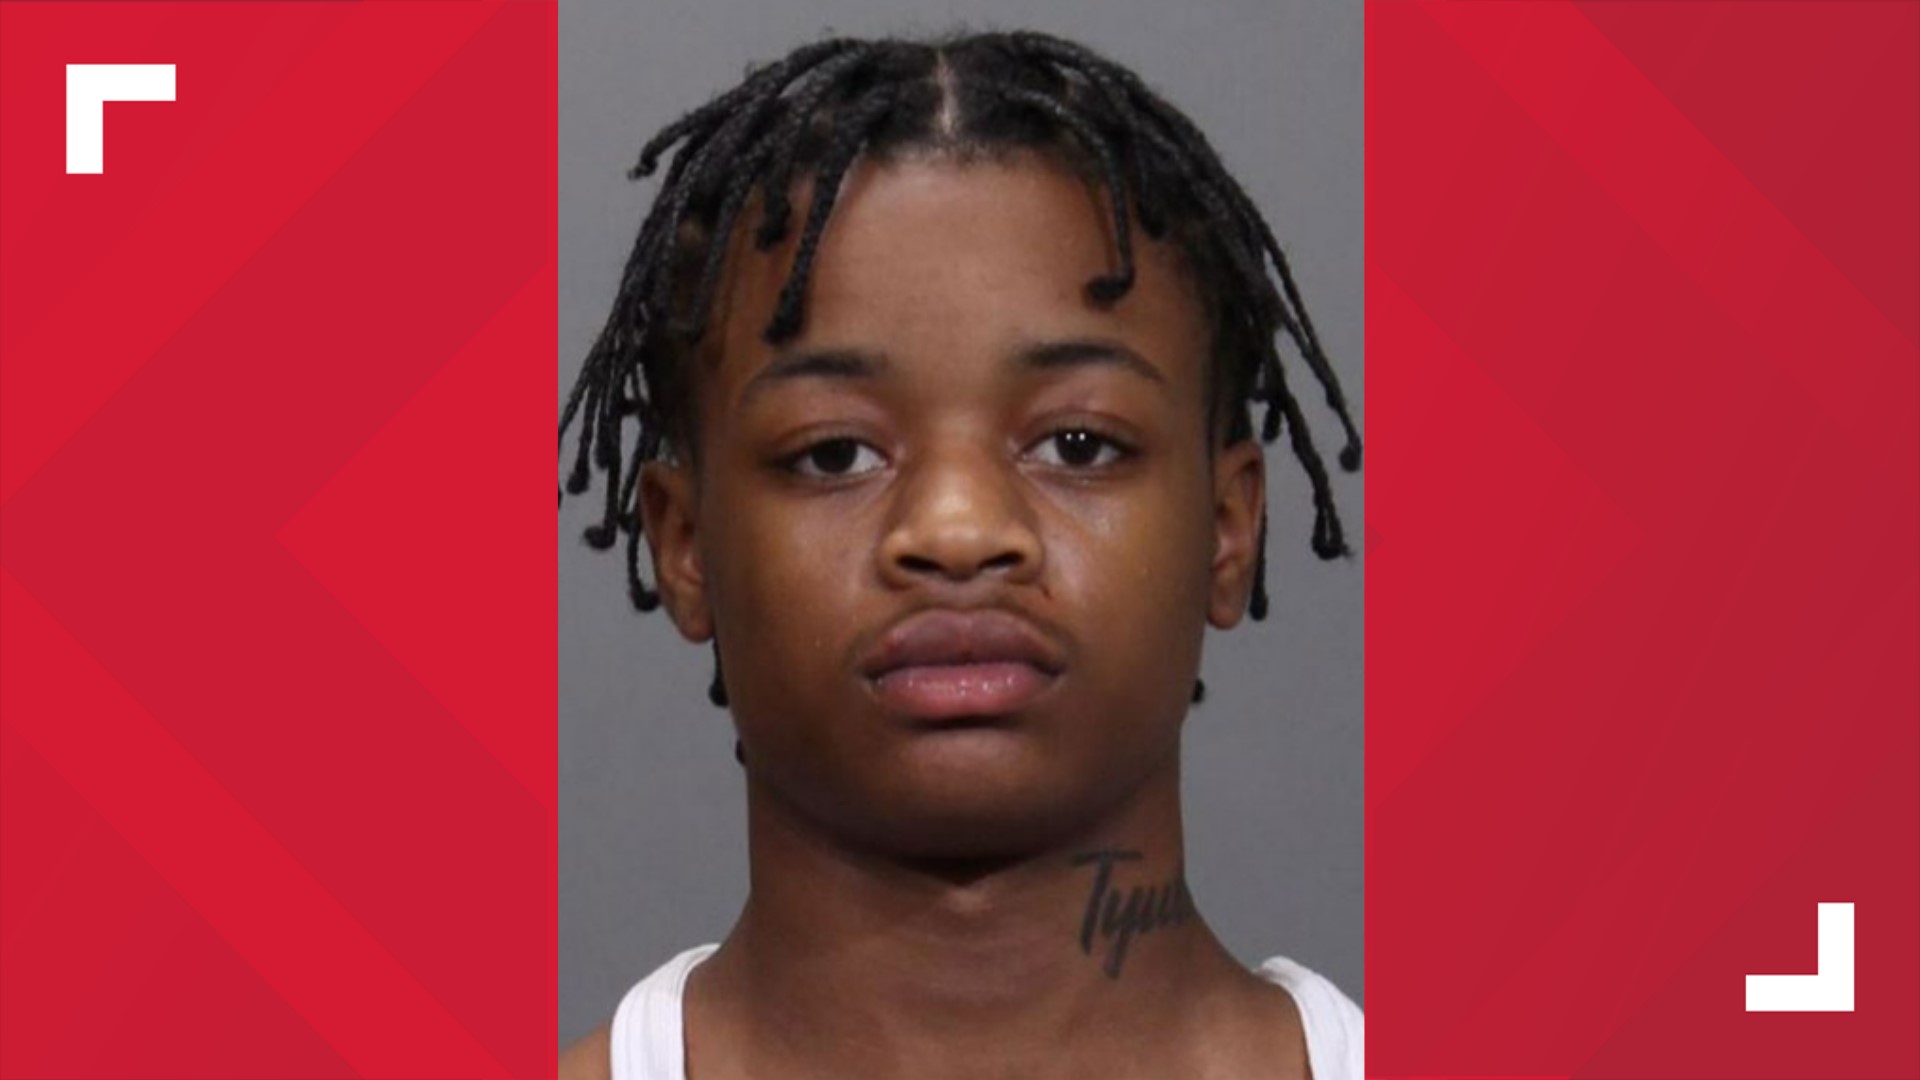 Mi'Quel Bowles, 18, was charged with obstructing justice, which is a fifth degree felony, in Imperial Stewart's disappearance.